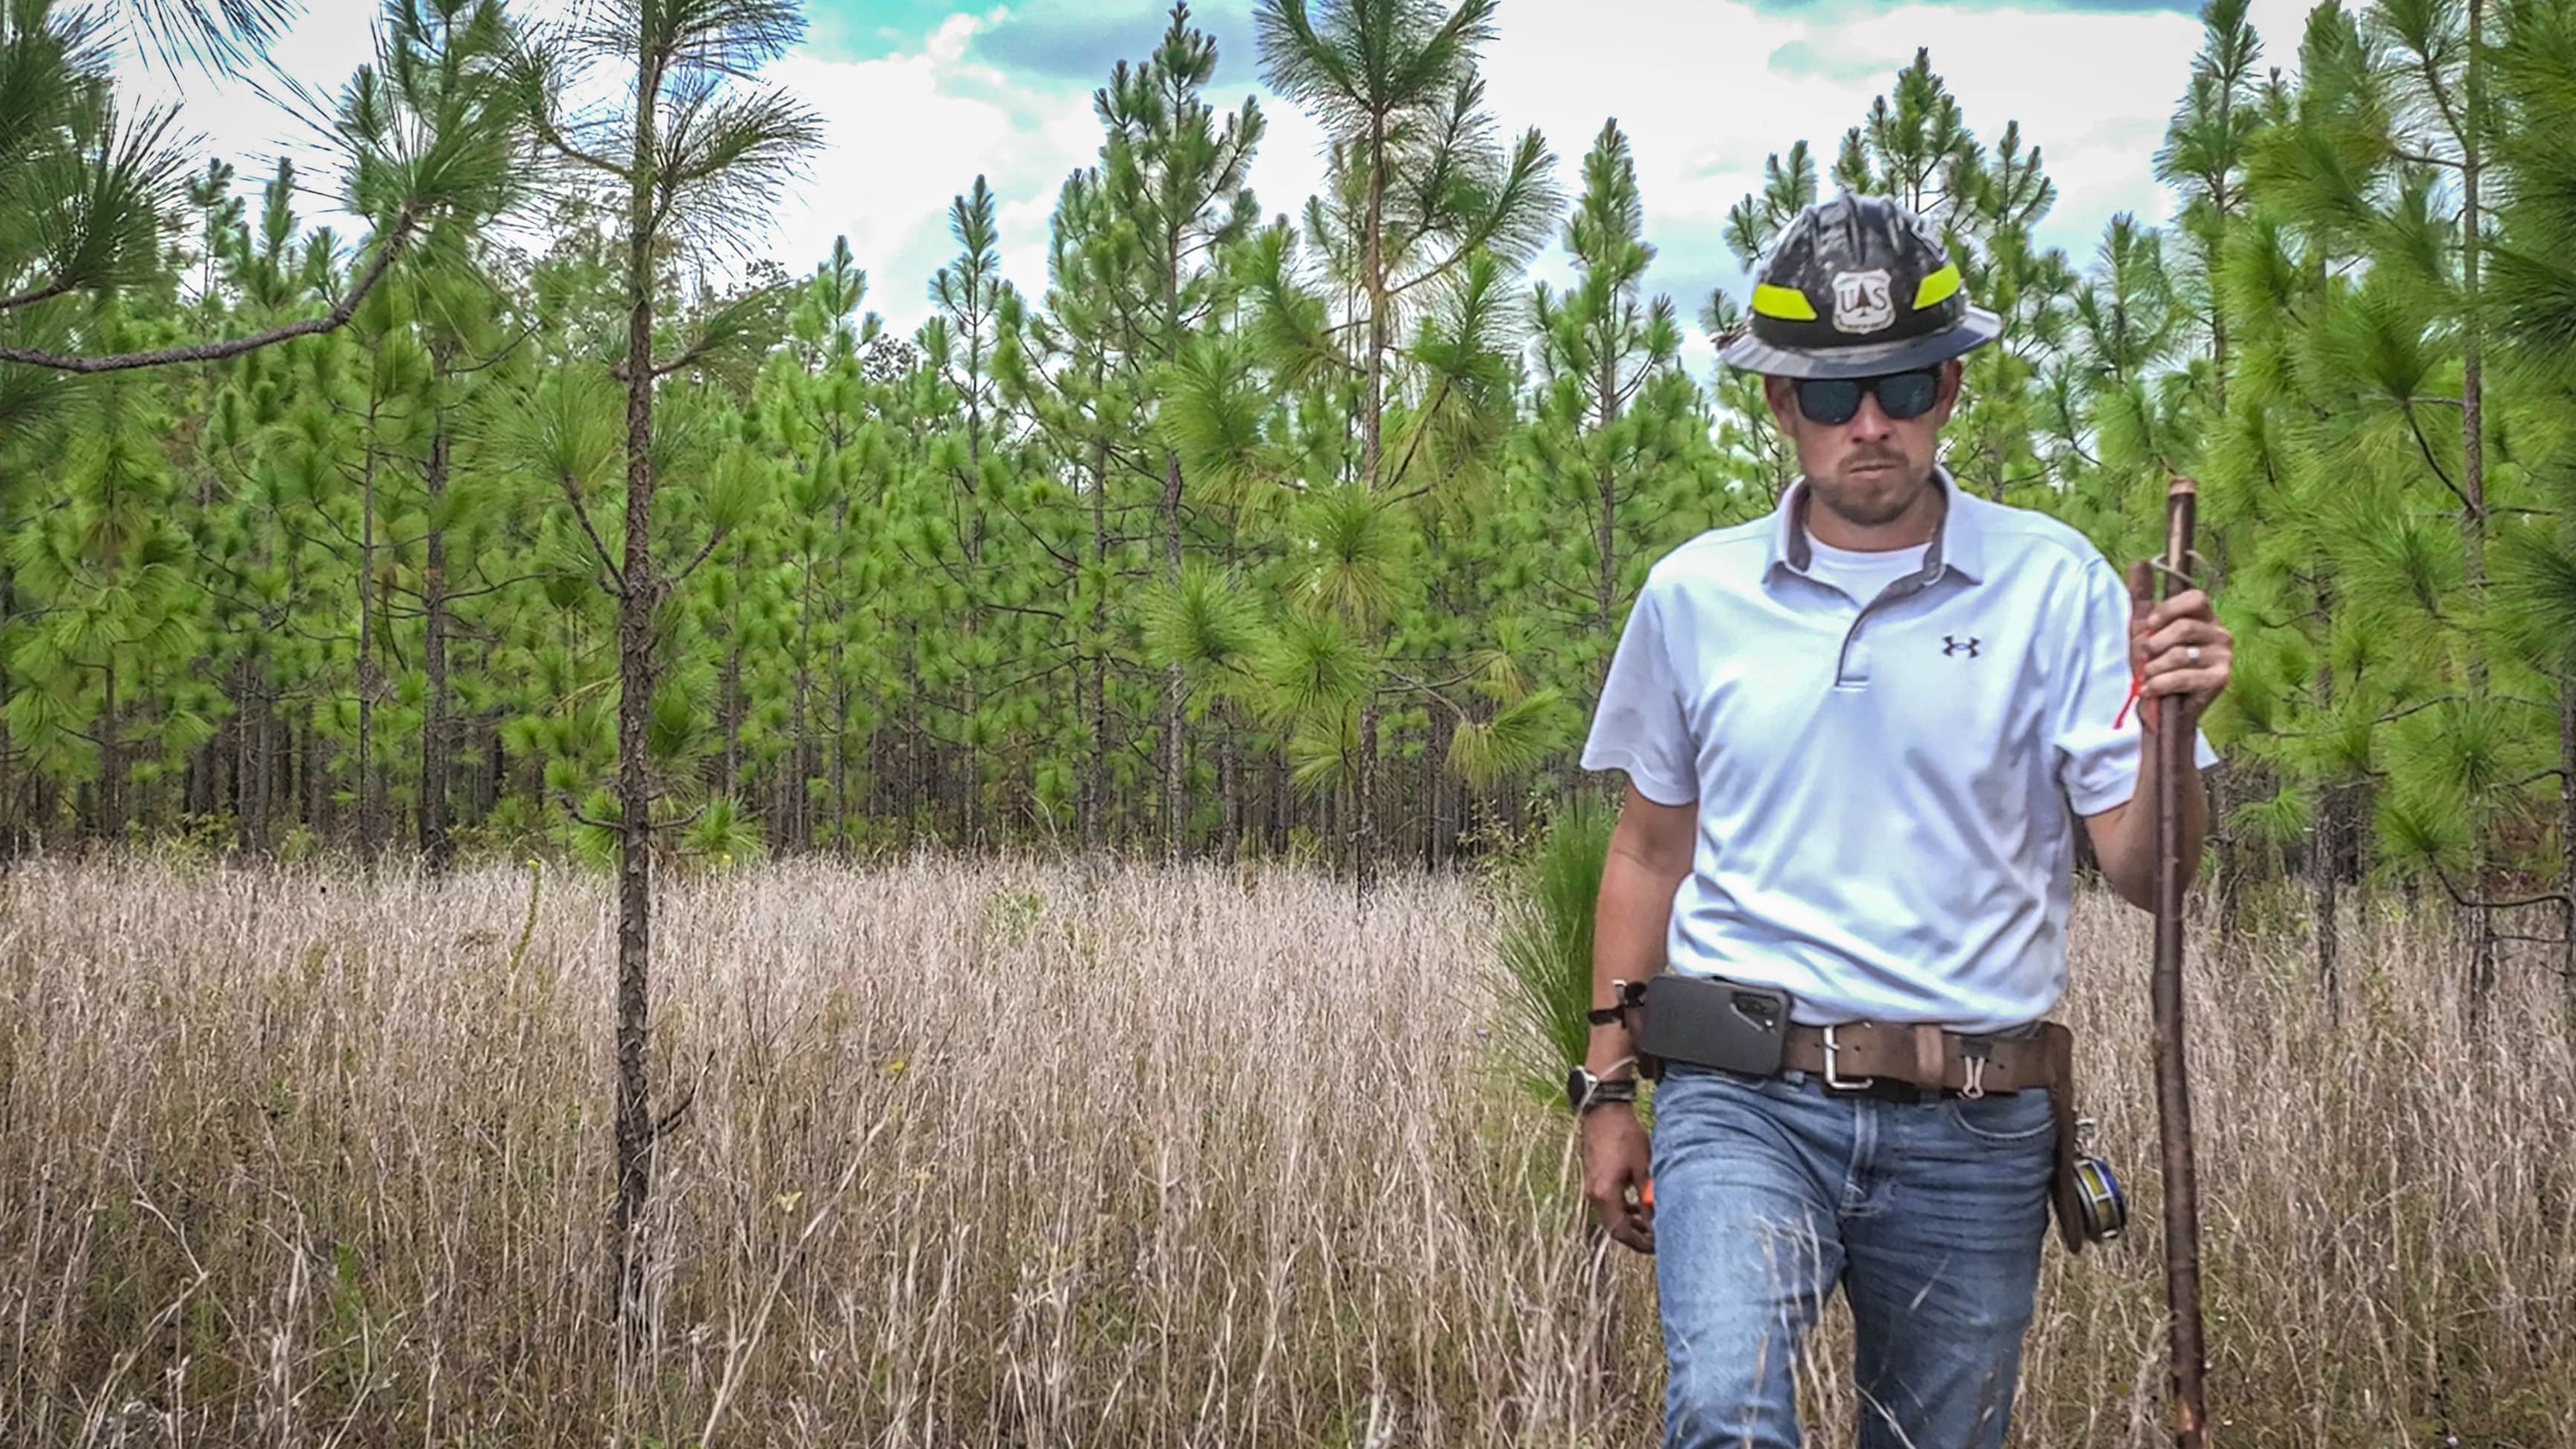 A man in jeans, a tee shirt and nonflexible hat walks through upper grass in a pine forest.